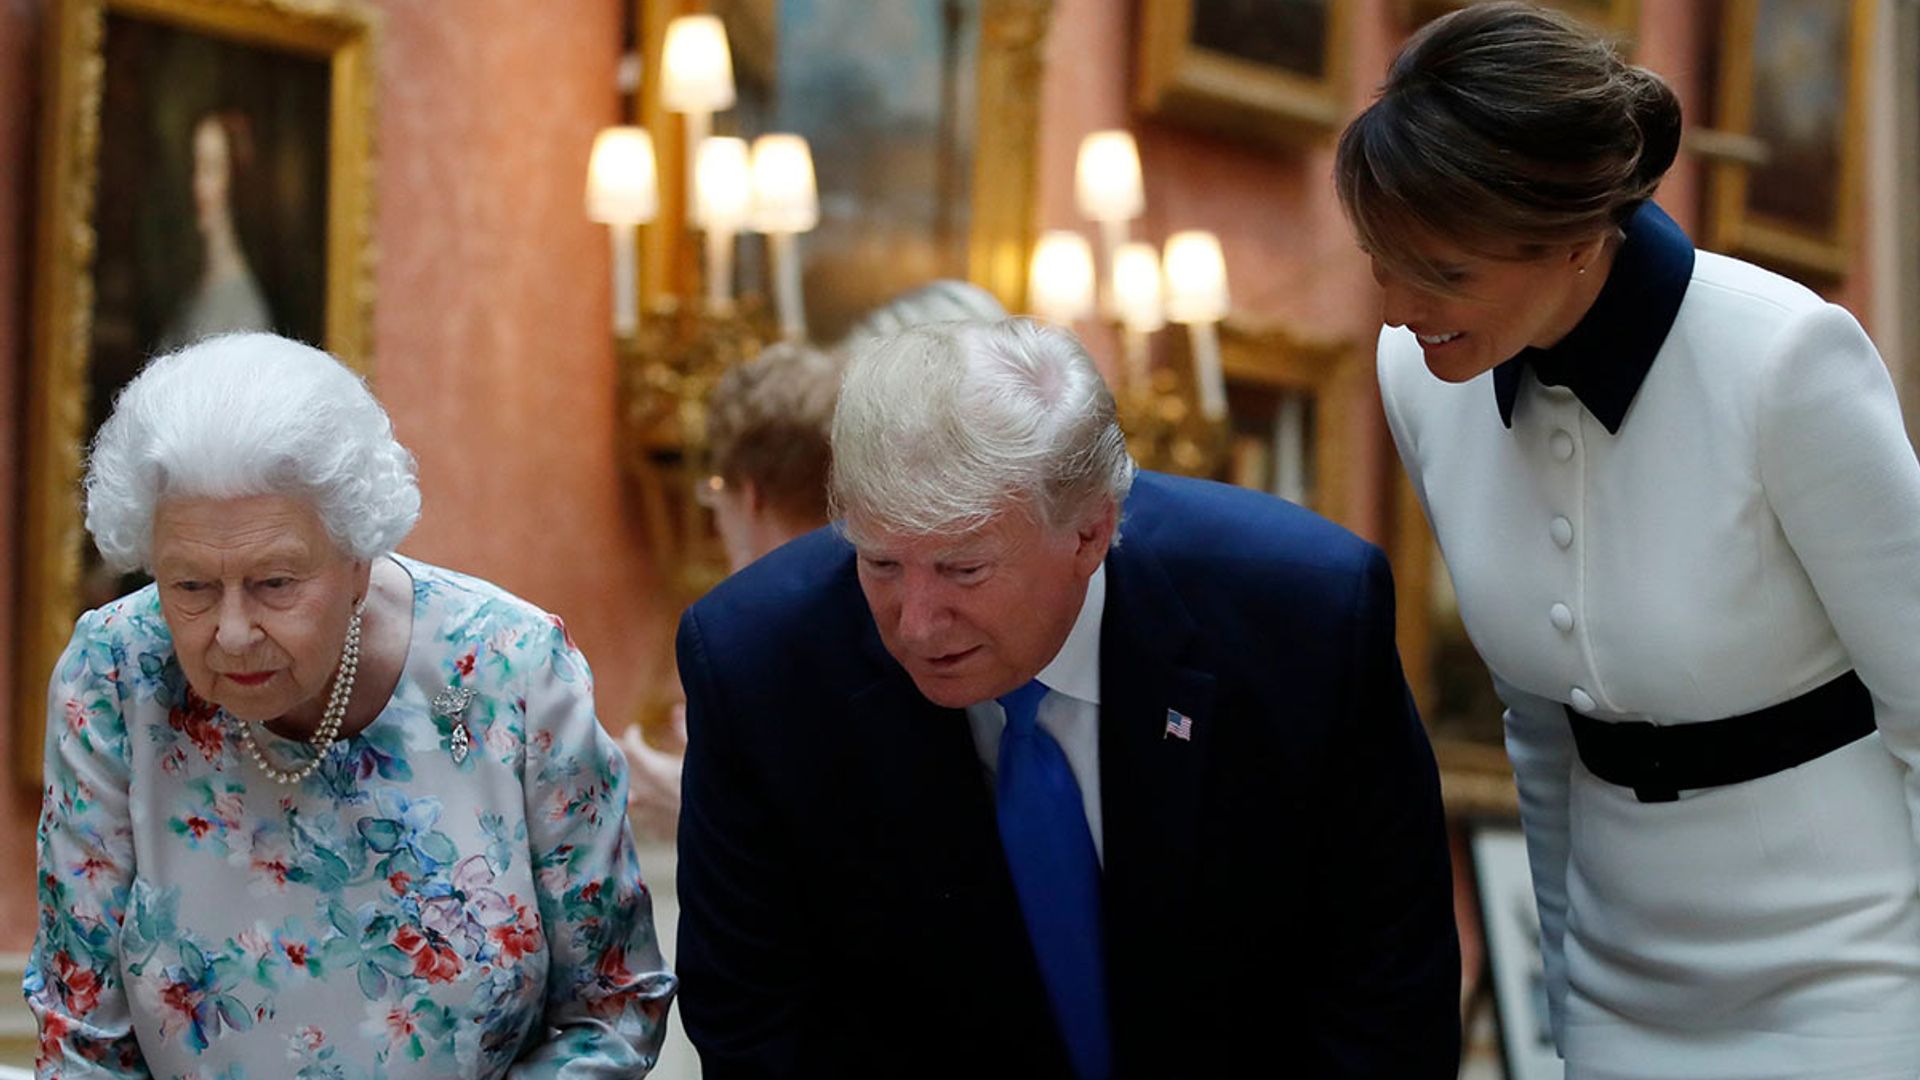 See what lavish gifts the Queen gave President Trump and wife Melania